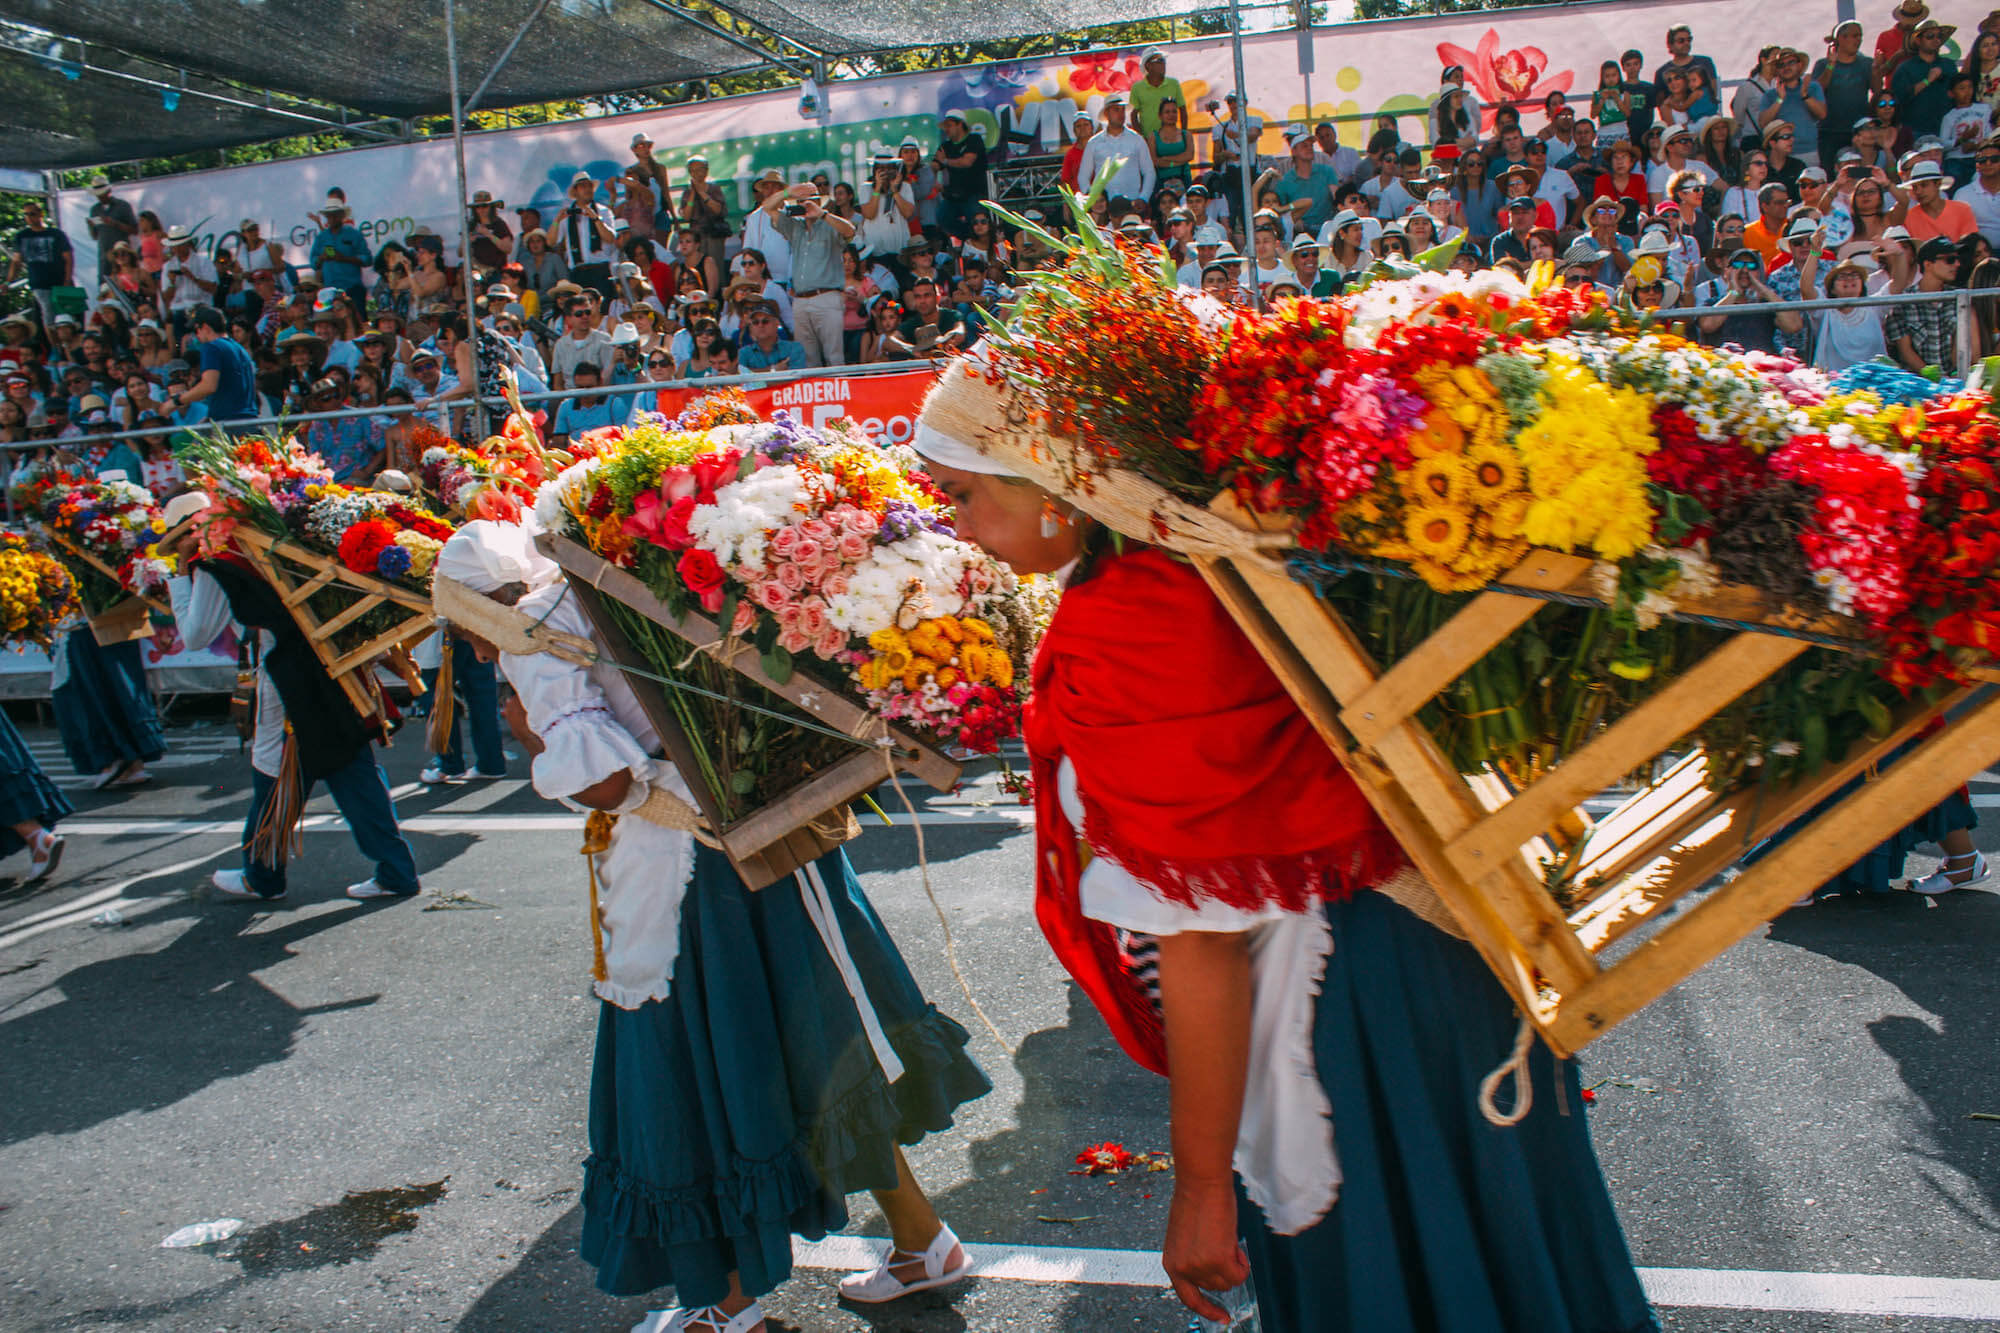 Feria de Flores: Seeing the Festival of Flowers in Medellin